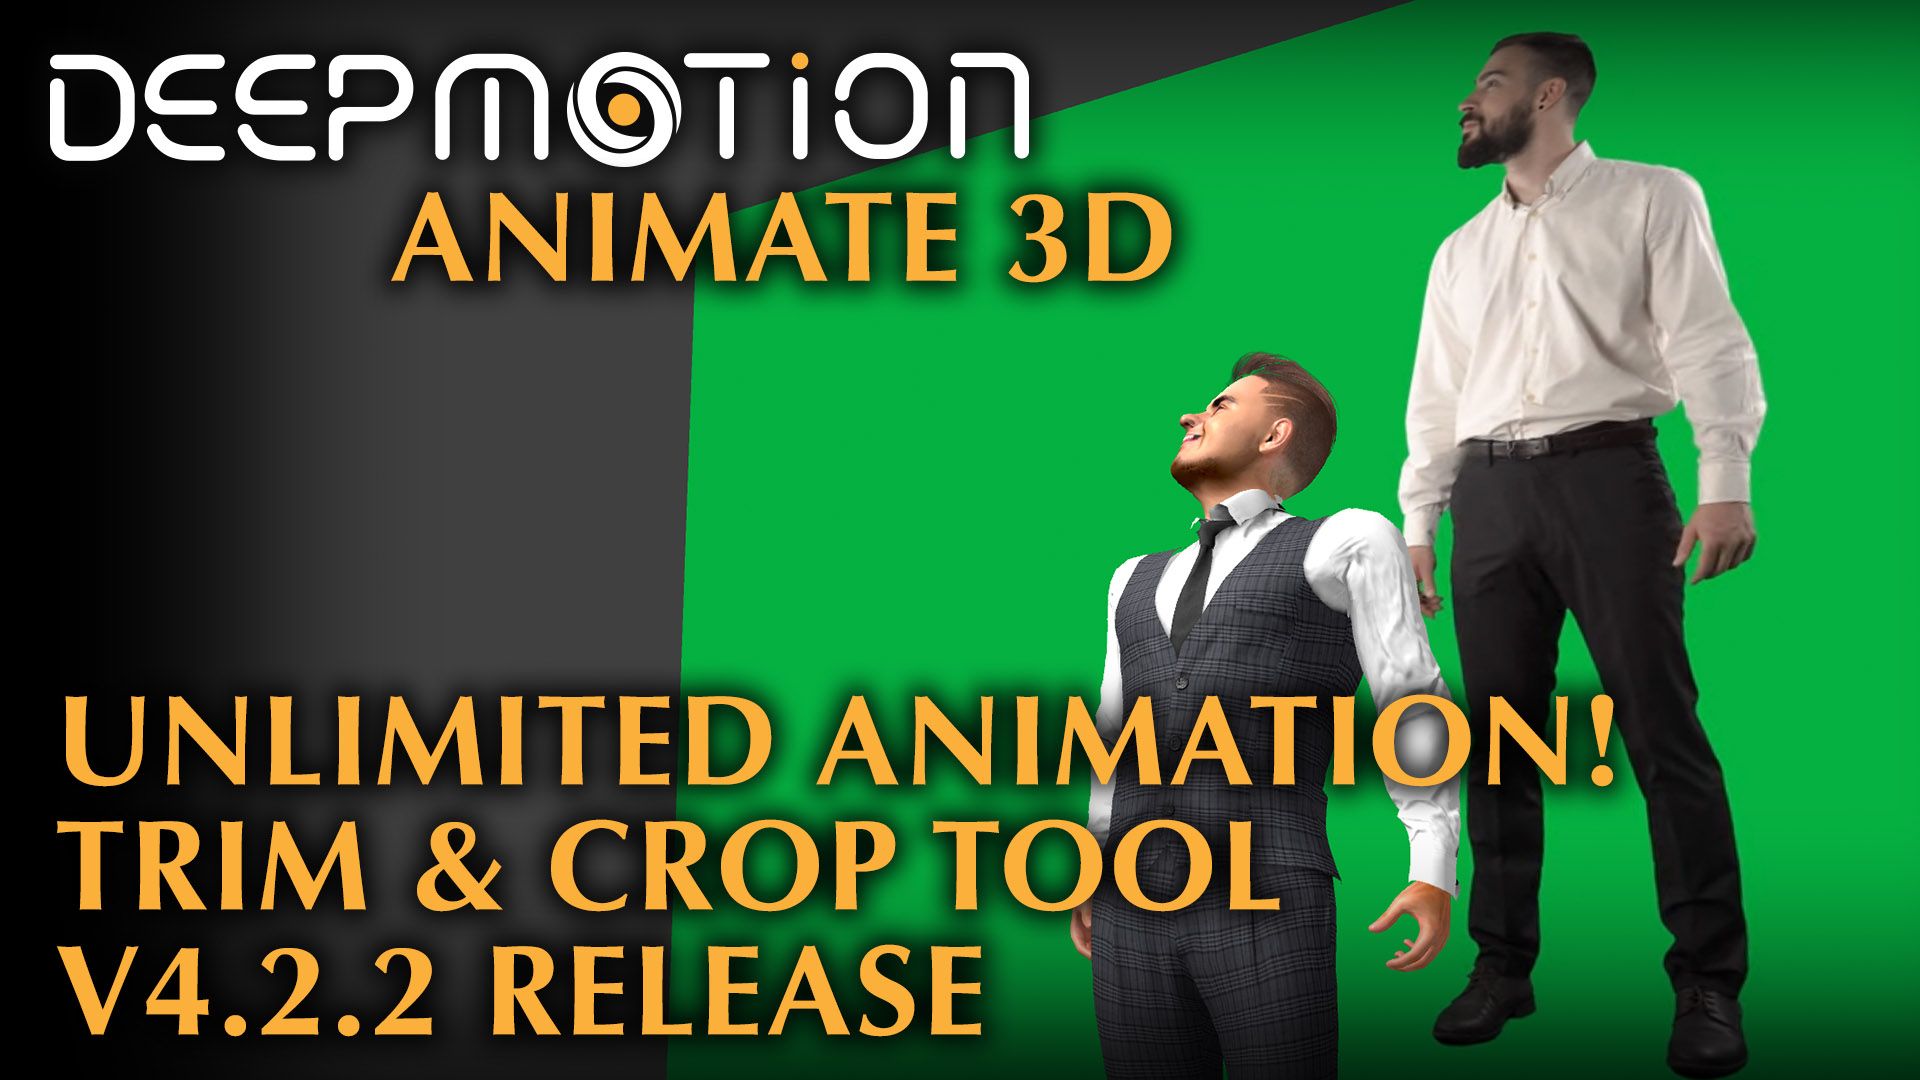 V4.2.2 - Unlimited Animation Creation is Here! A New Trim & Crop Tool + Improved Head Tracking